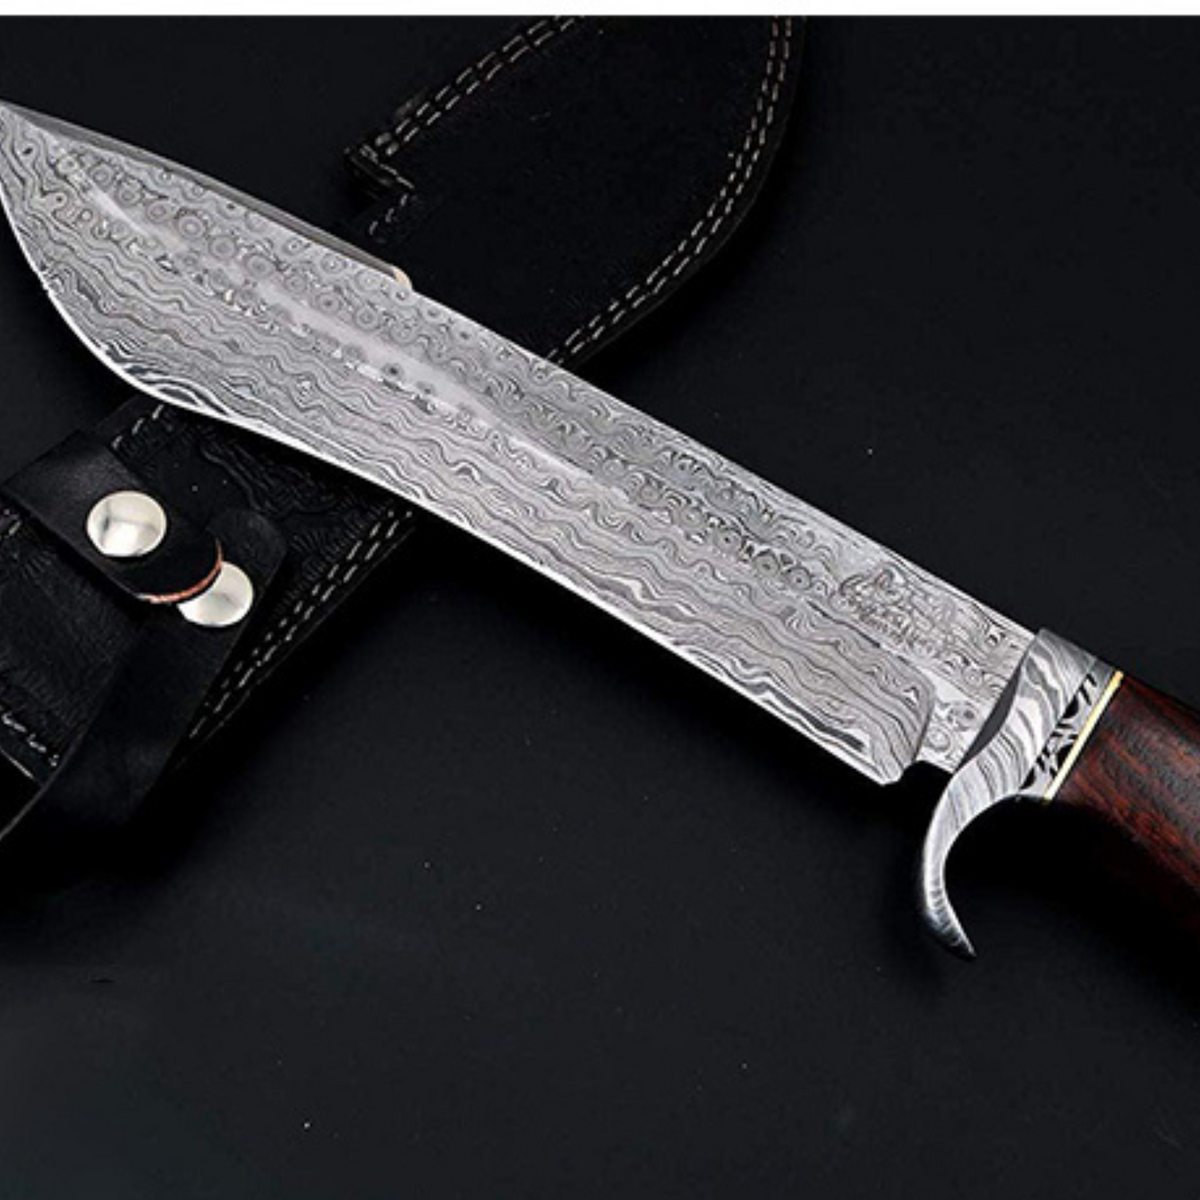 Sequoia Knife 15 Inches LONG 9 Inches BLADE 13 Ounce Hunting Fixed Blade Bowie Knife Handmade Damascus Knife